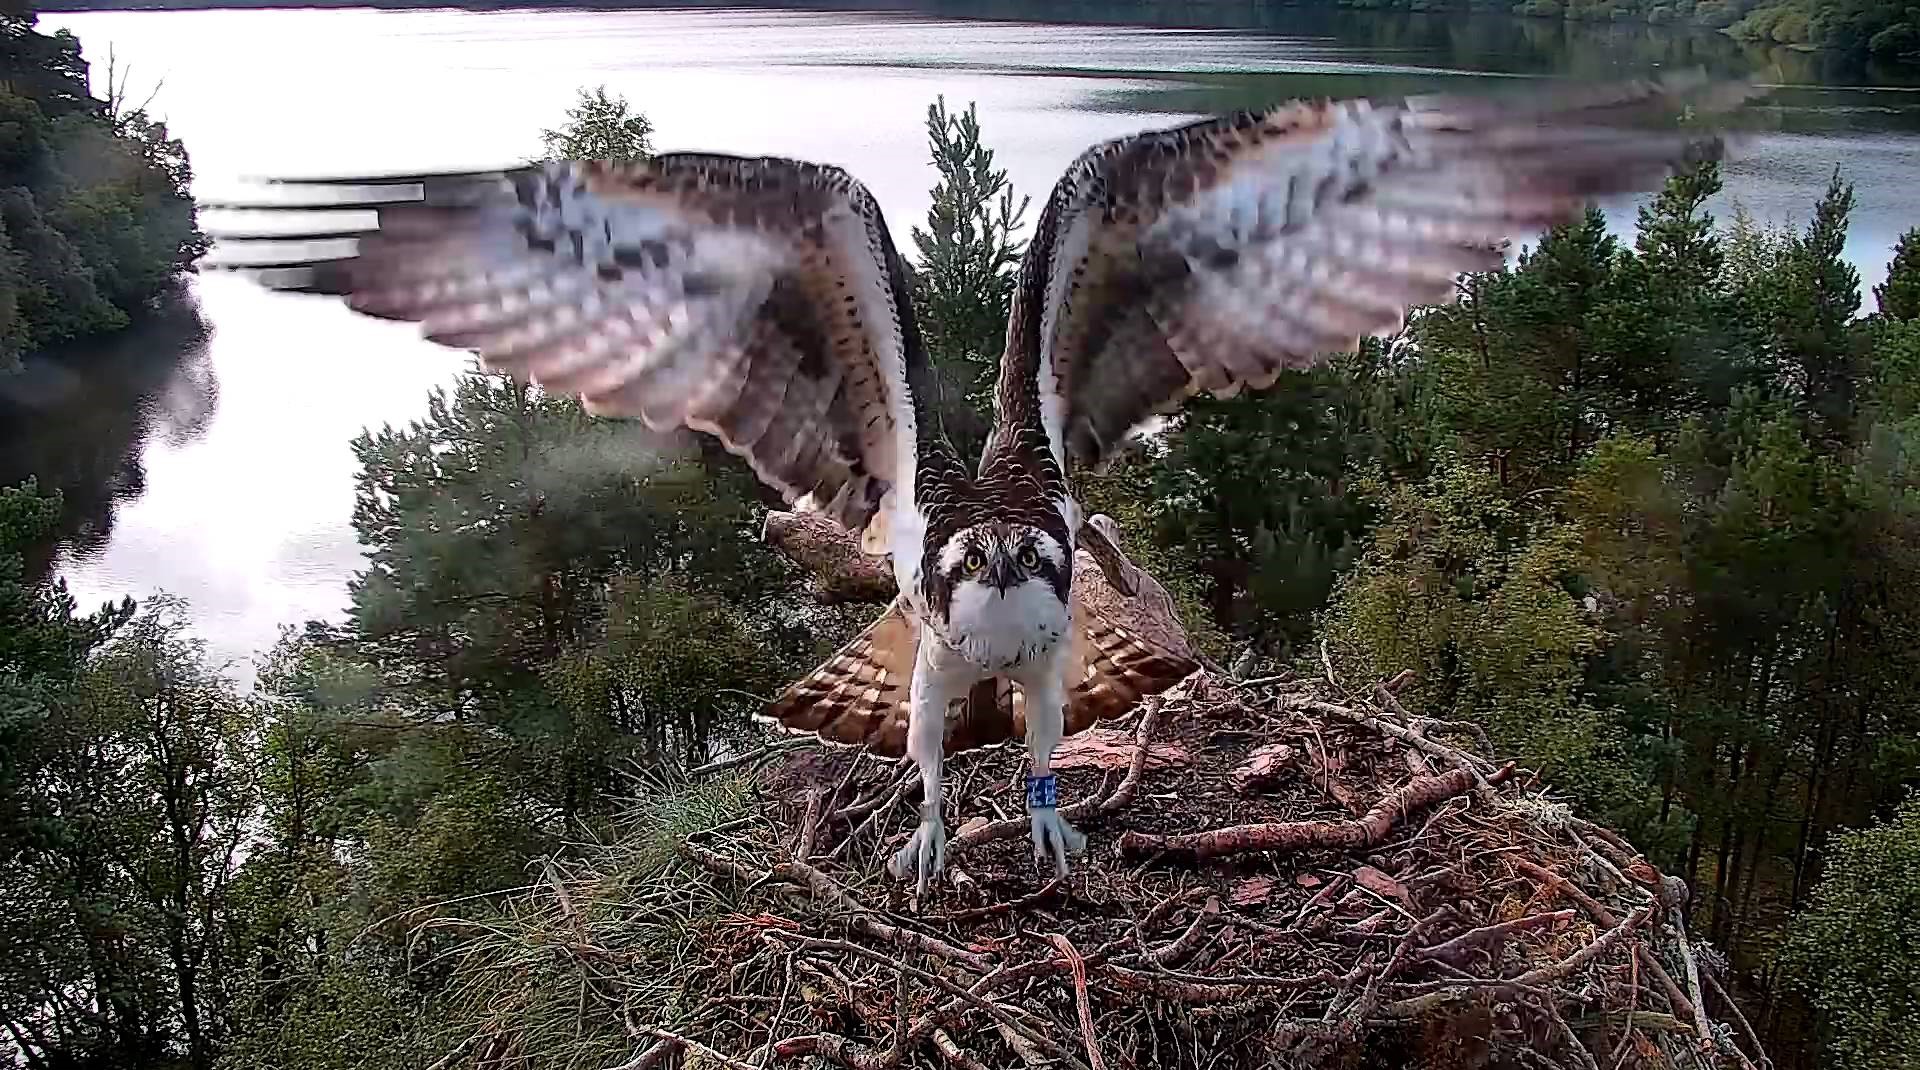 Osprey Diary at Loch of the Lowes – So Long and Fly High